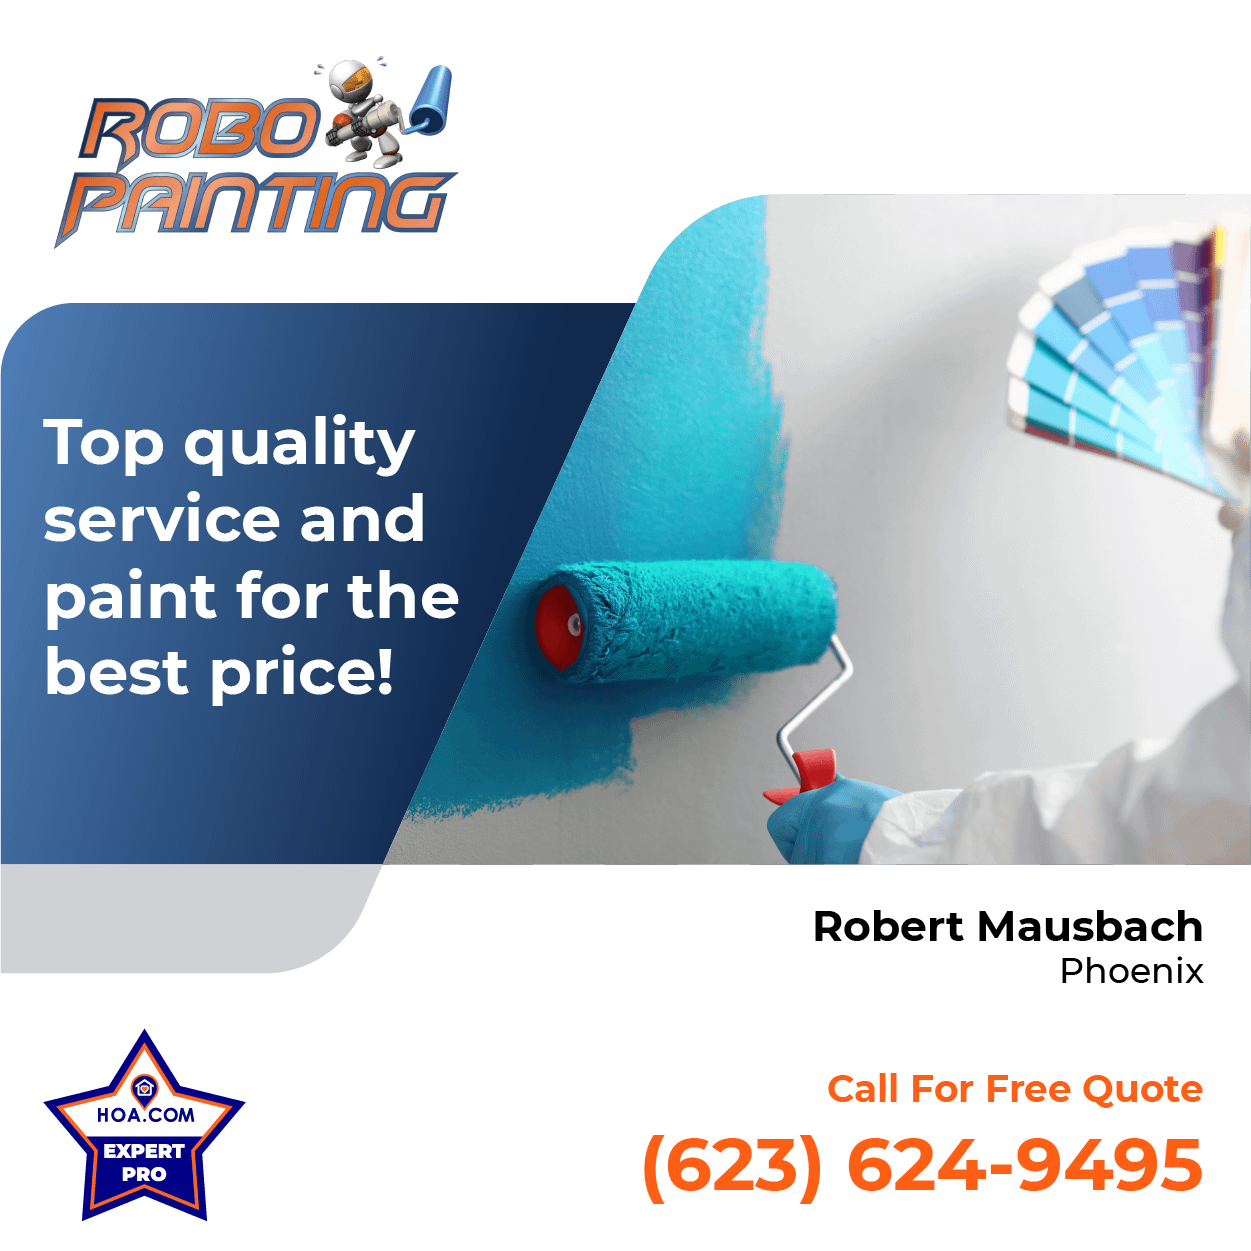 Robo Painting Top Quality Service